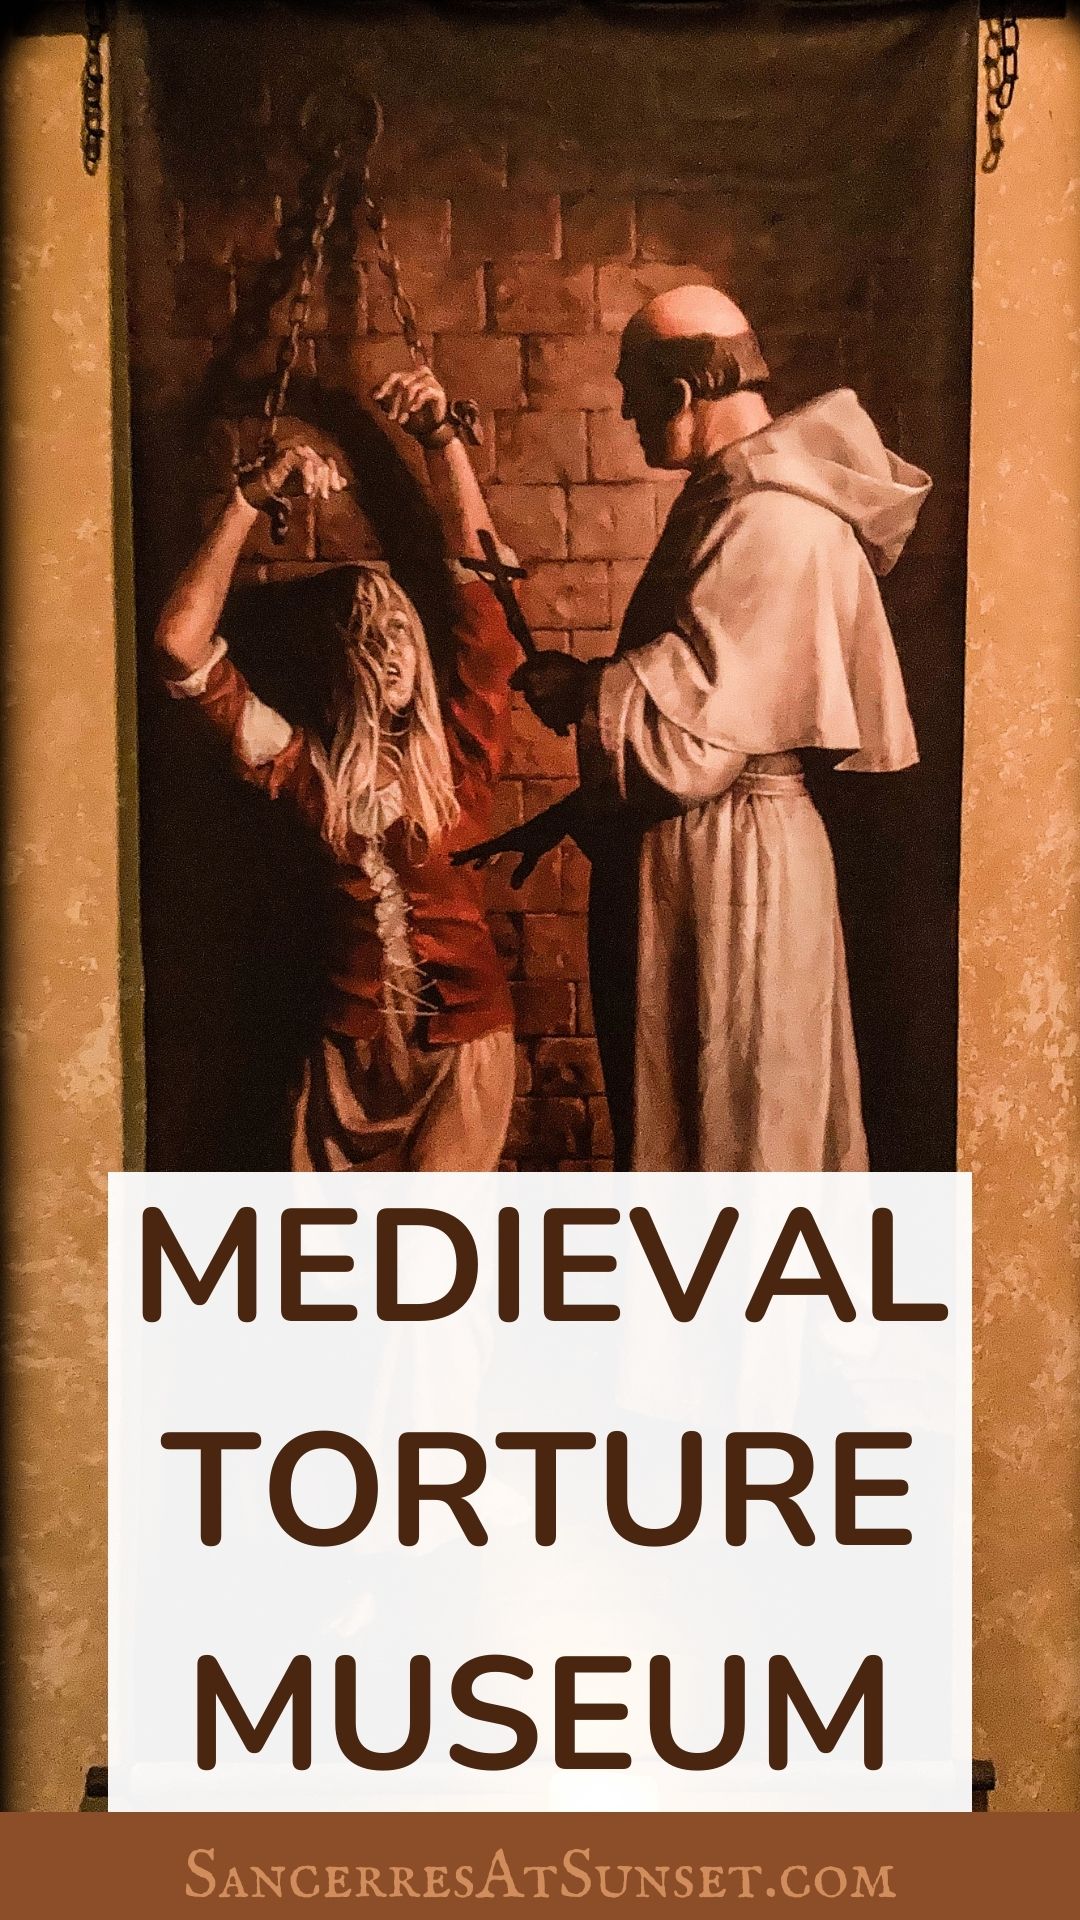 Medieval Torture Museum in St. Augustine, Florida